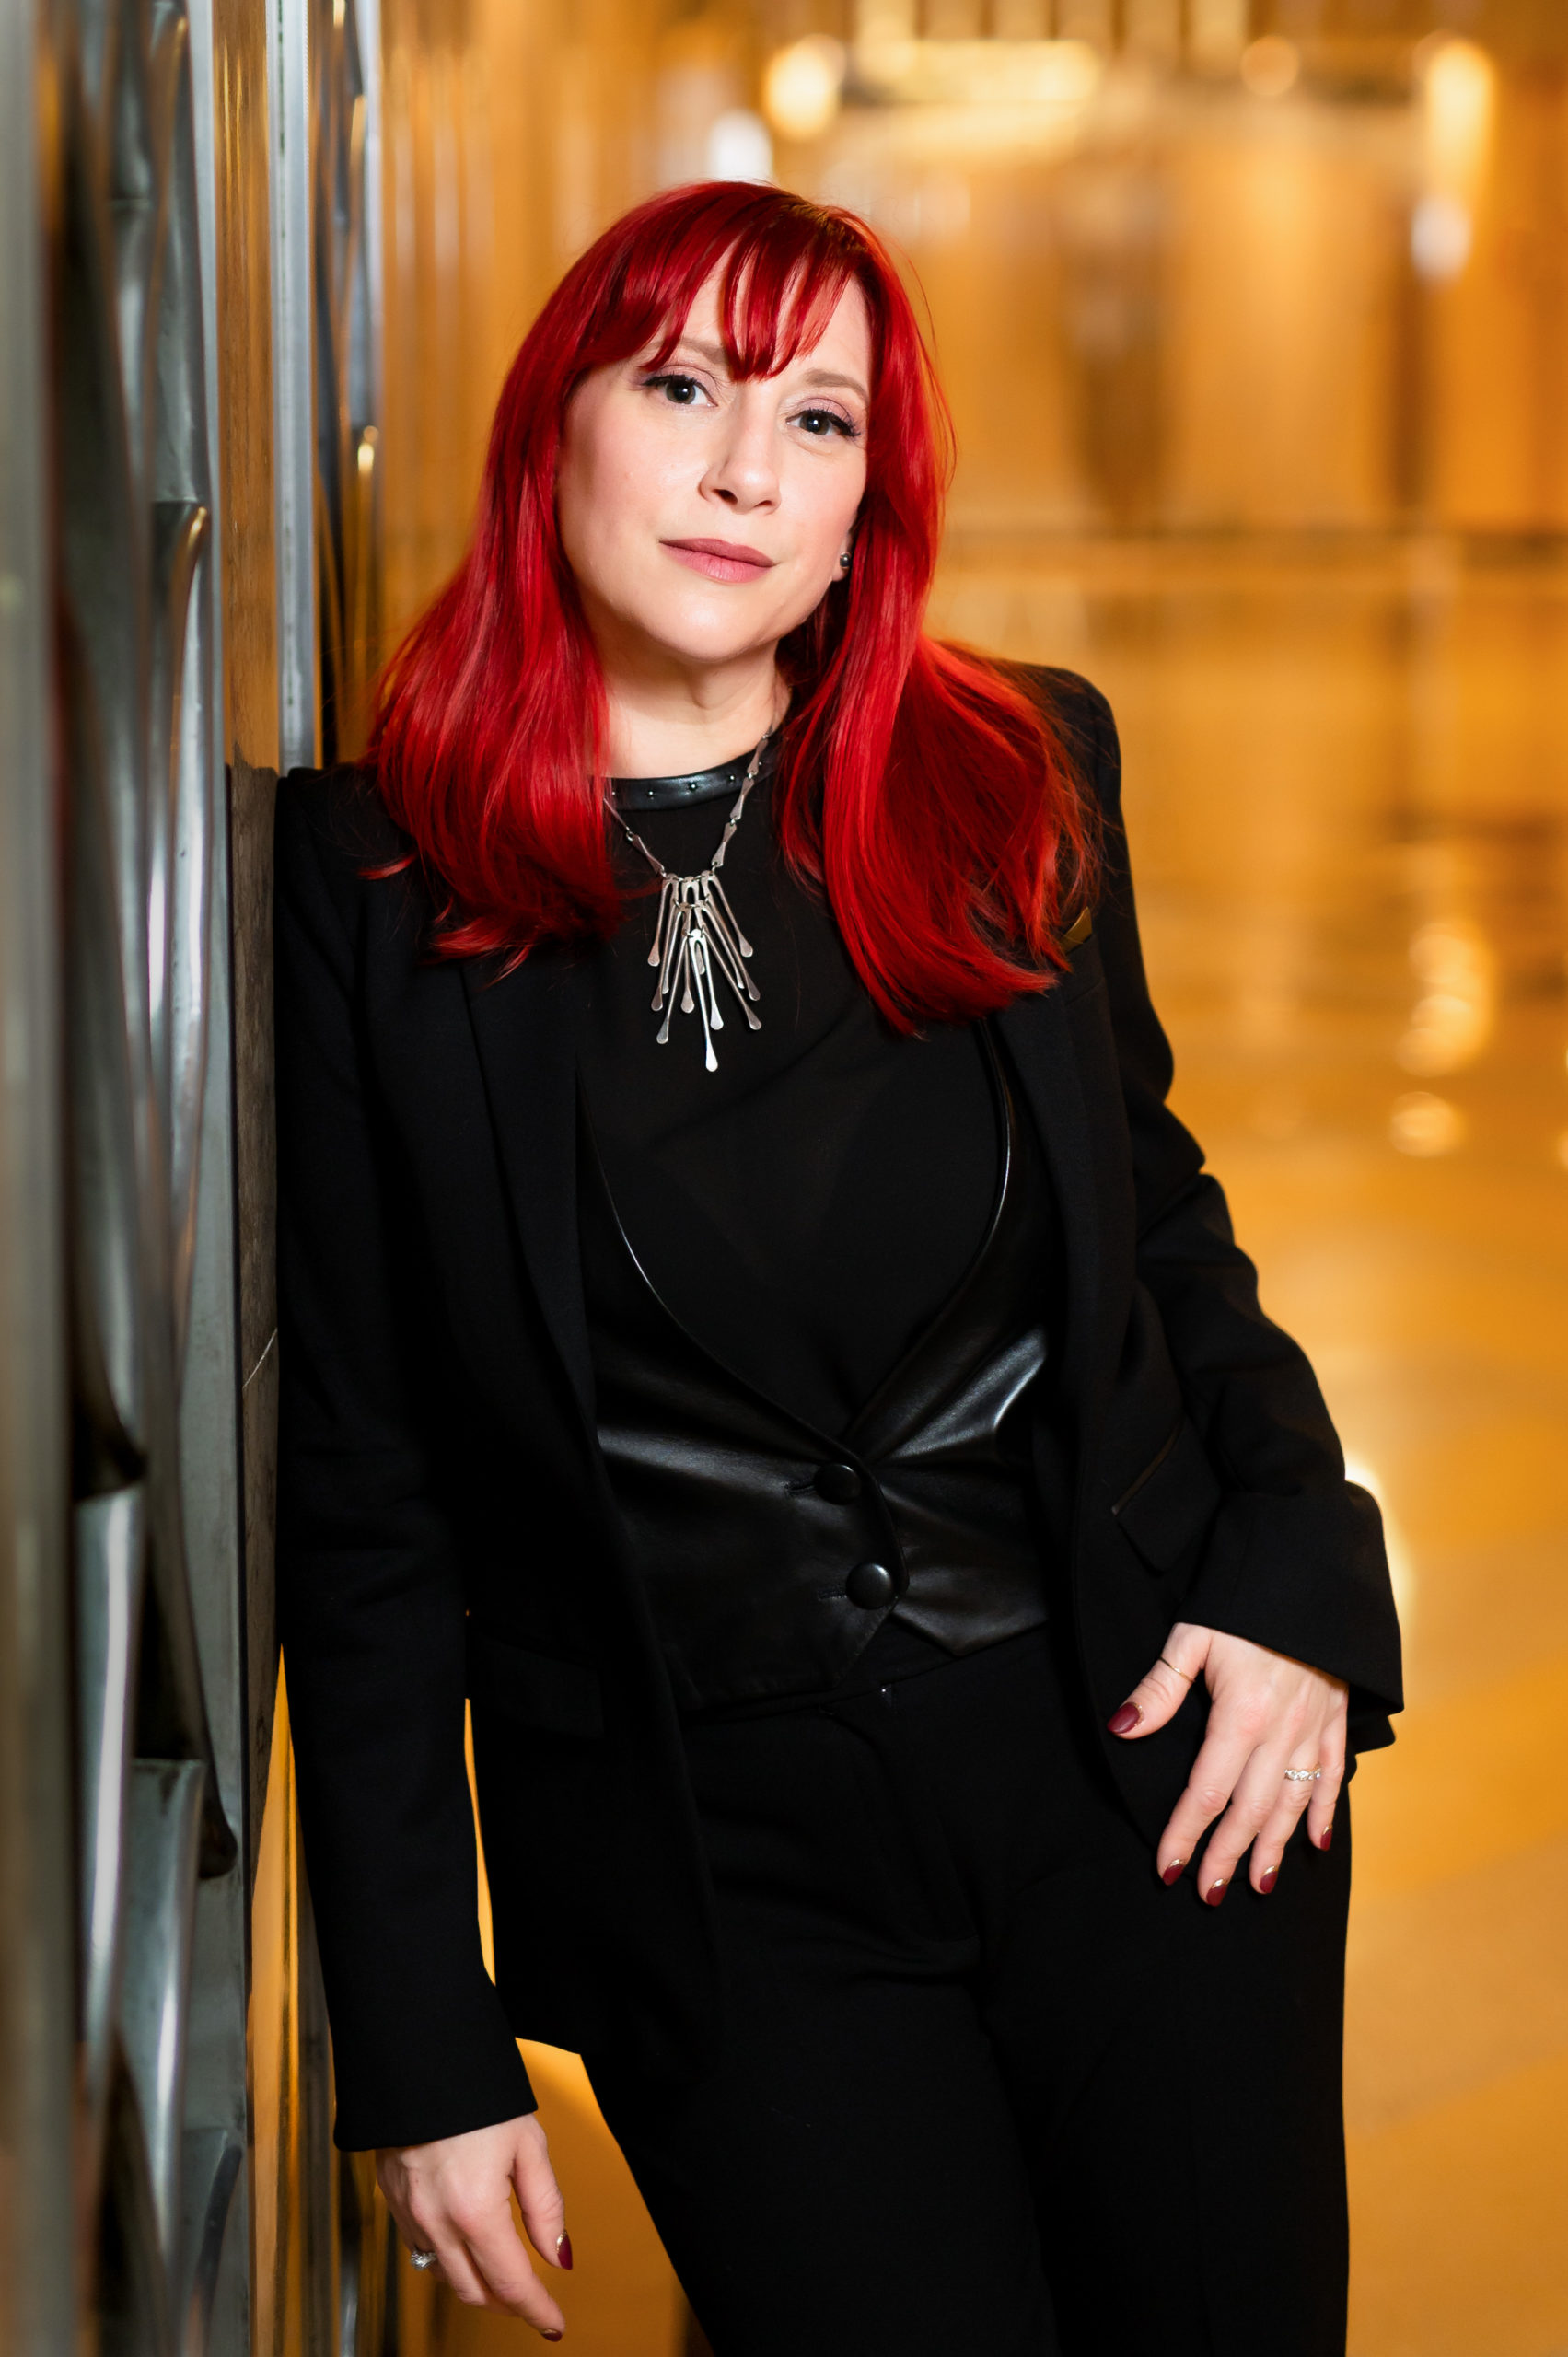 Manhattan headshot of a woman with red hair in the foyer of her office building